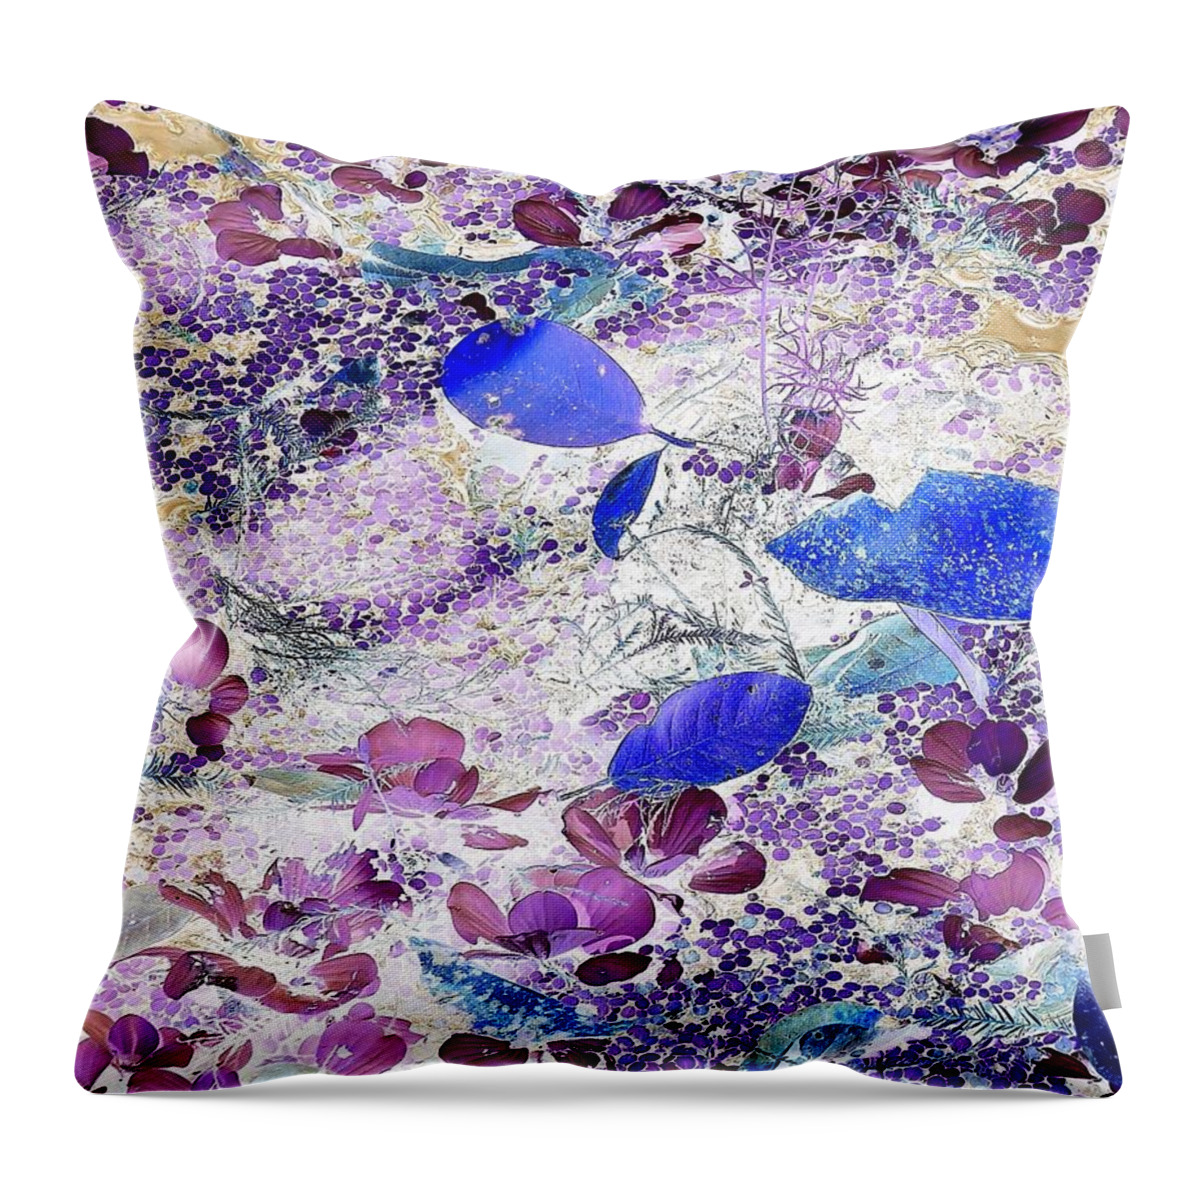 Abstract Throw Pillow featuring the digital art Swamp Fantasy by John Hintz